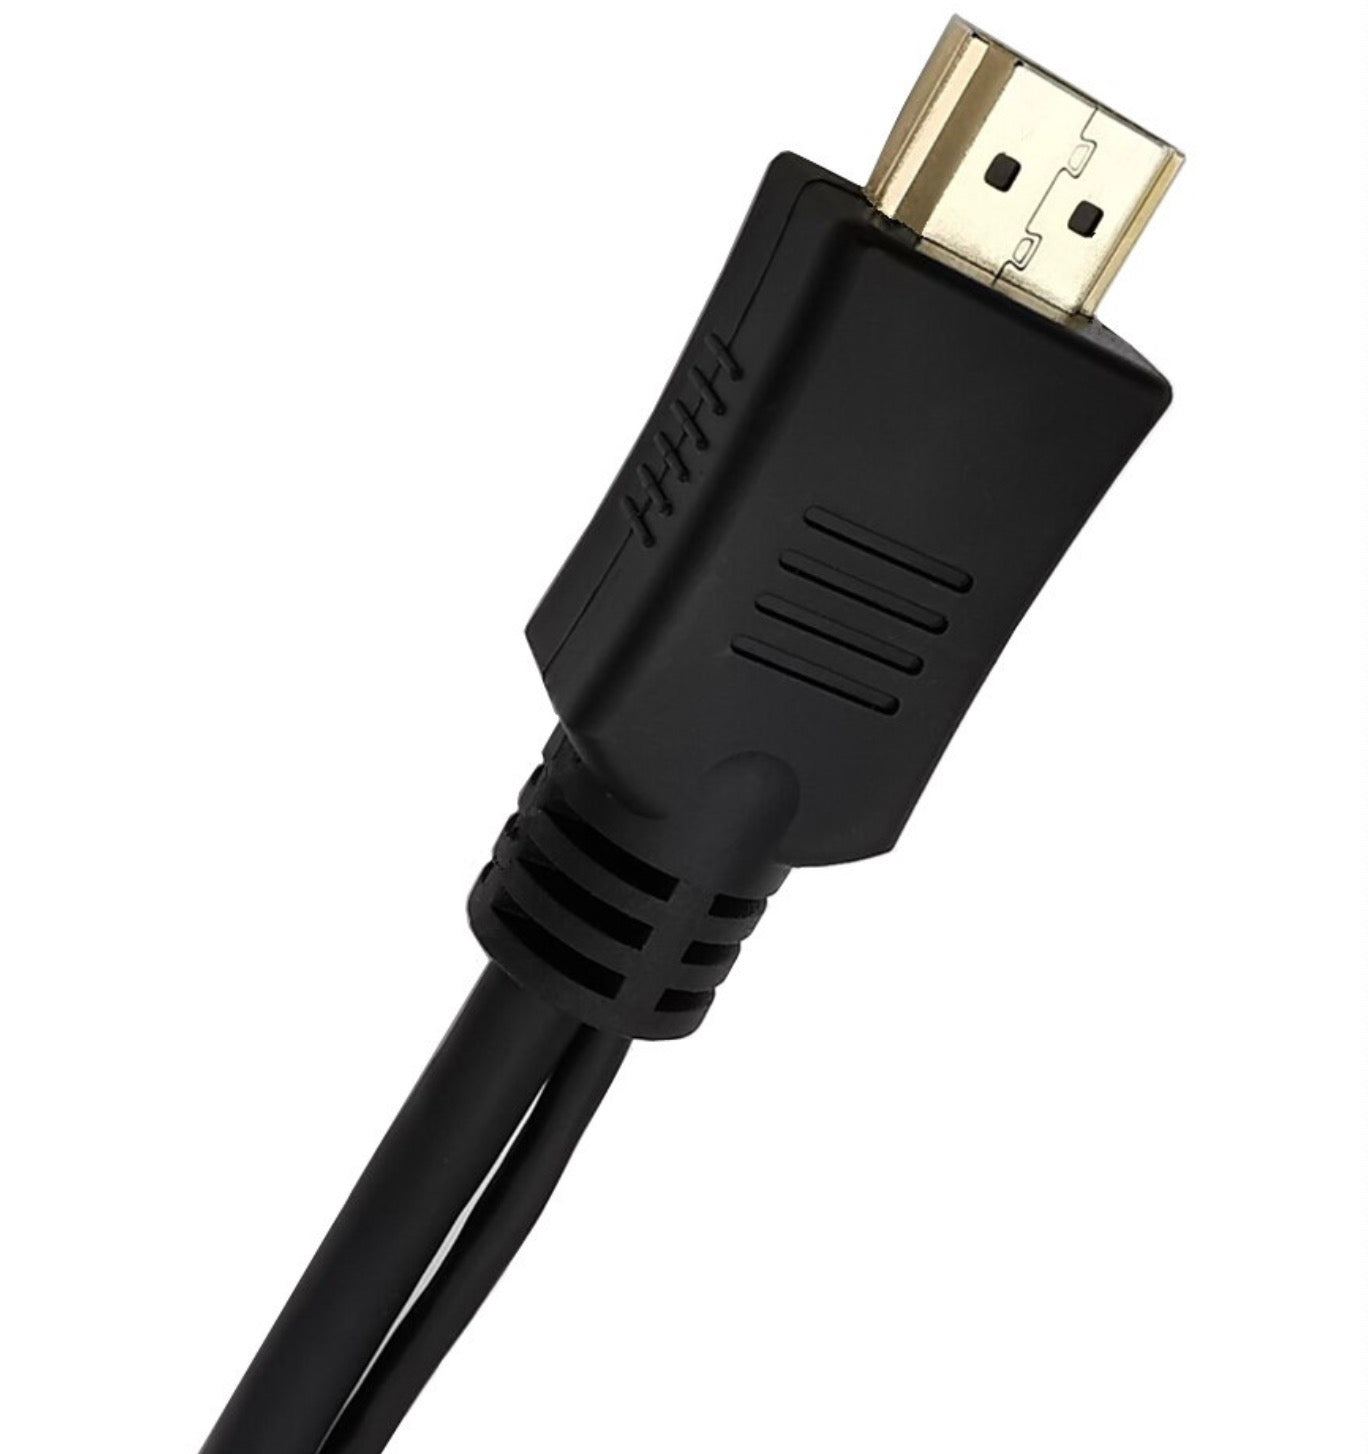 HDMI Male to HDMI Male With USB Power Cable 1.5m